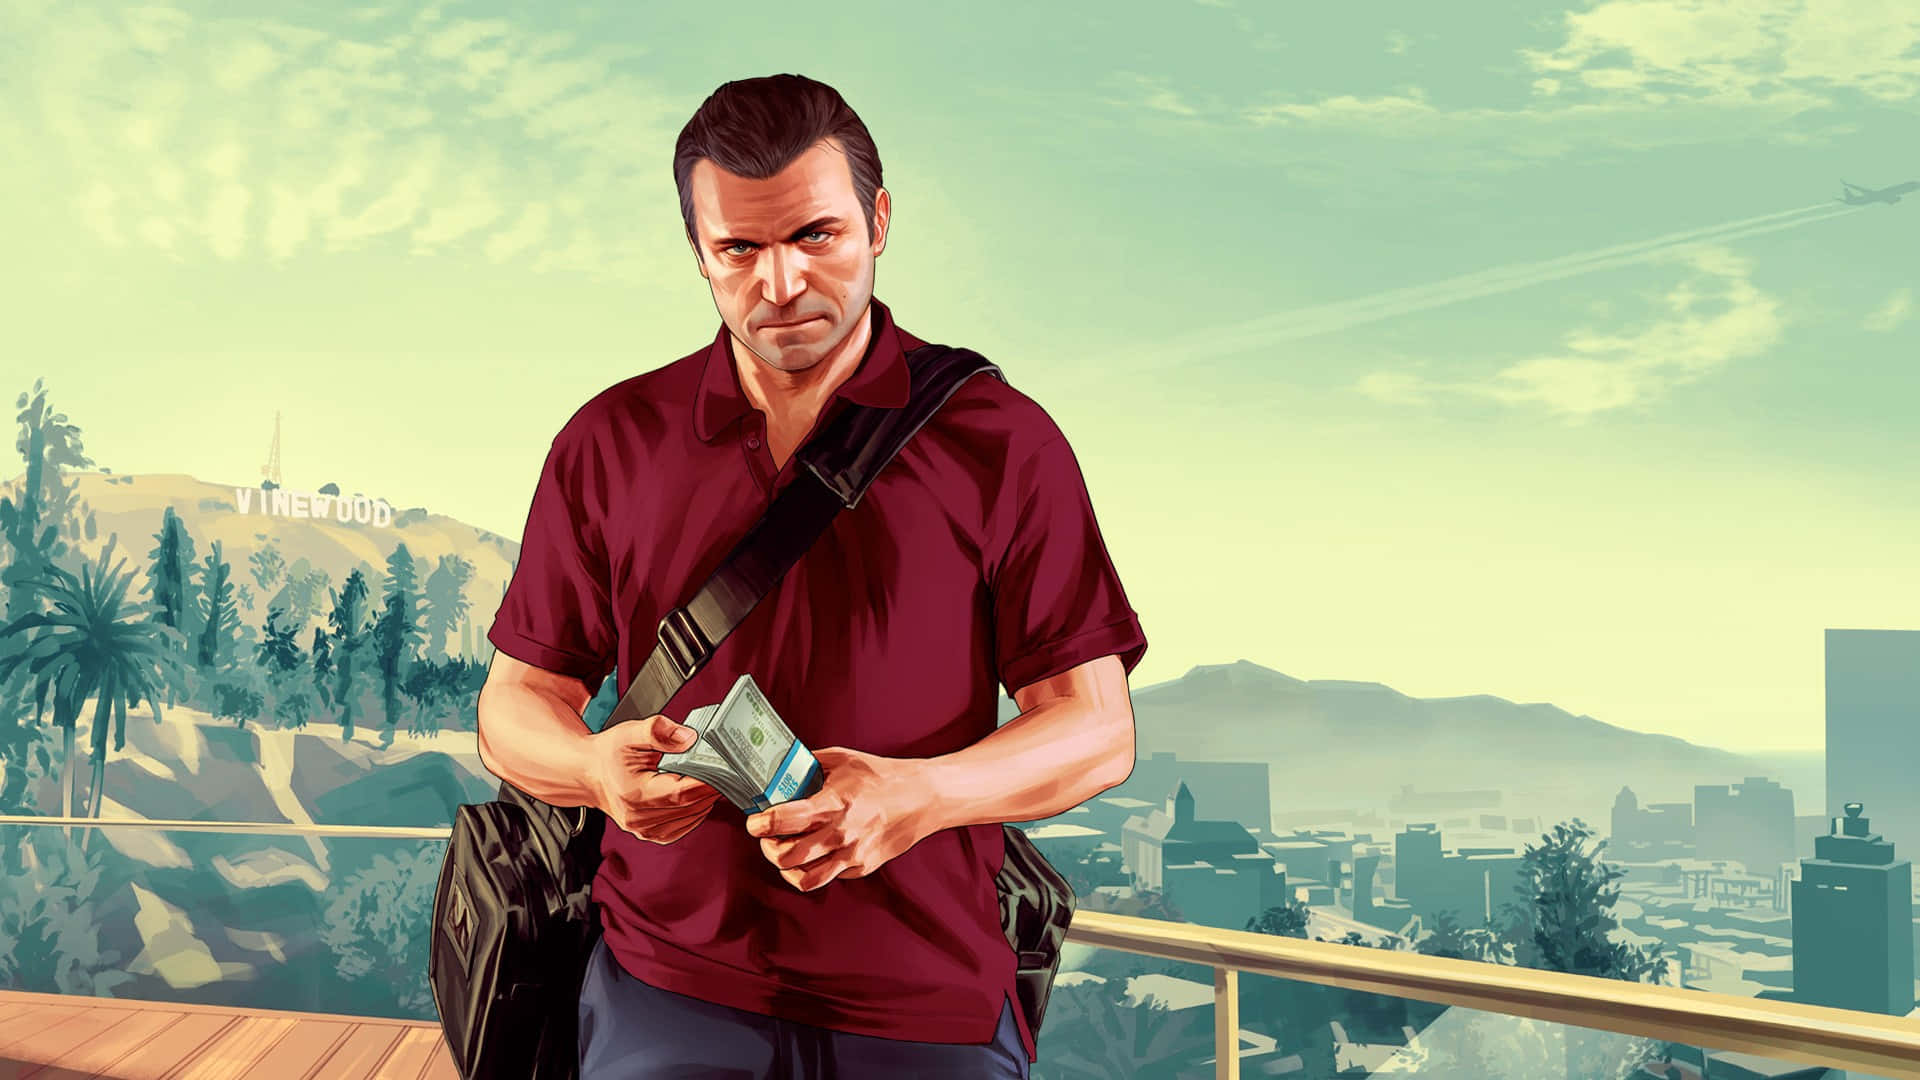 Grand Theft Auto V – Play the Big Game